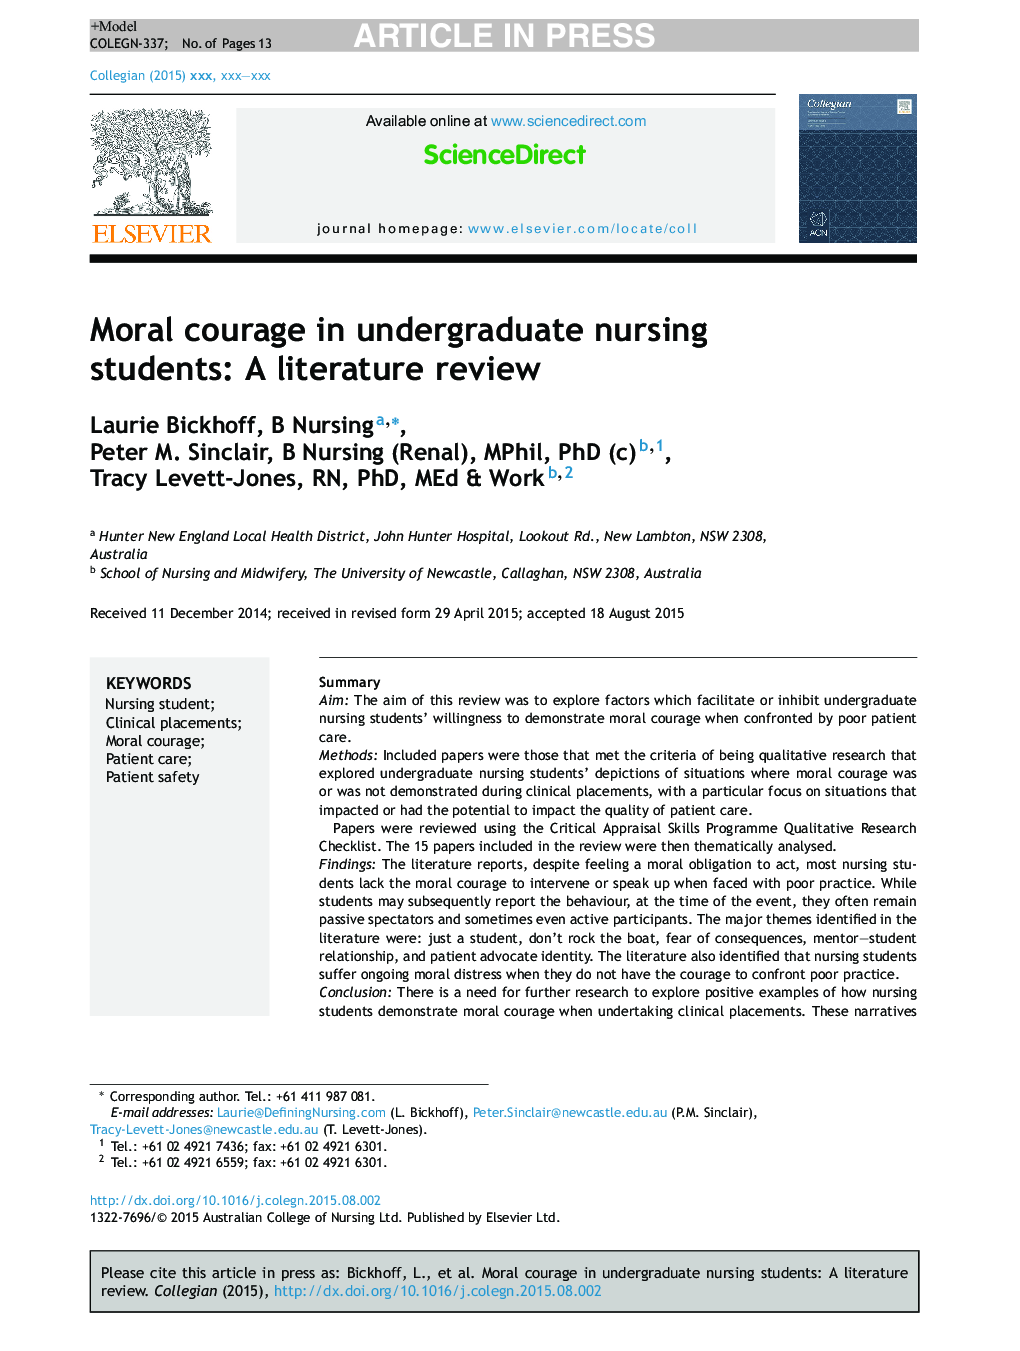 Moral courage in undergraduate nursing students: A literature review